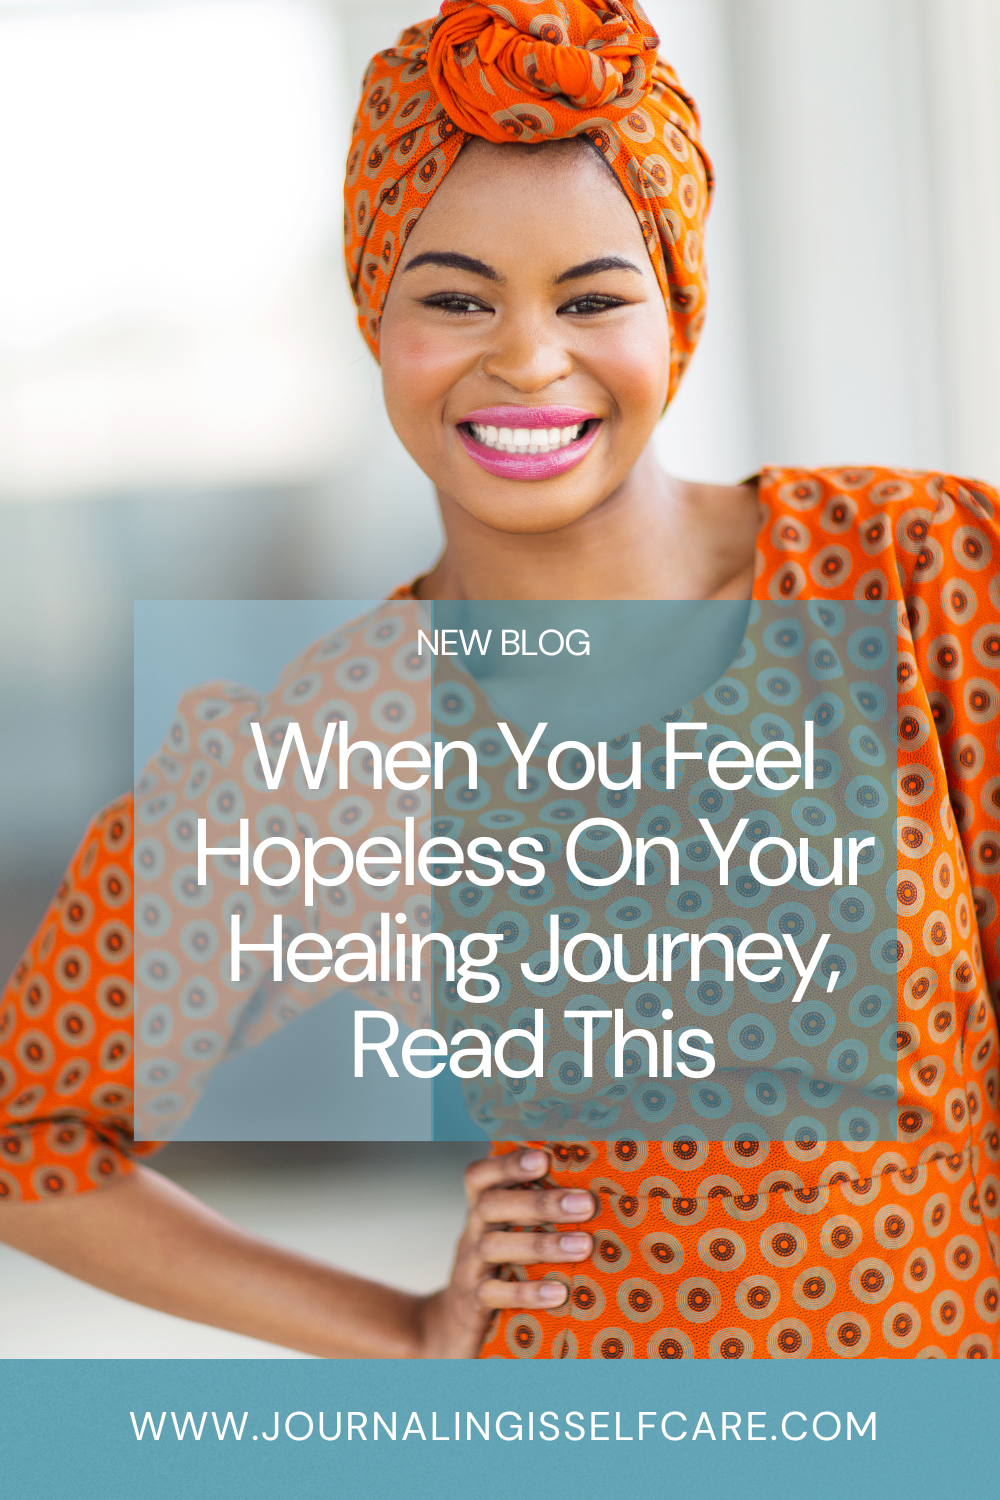 When You Feel Hopeless On Your Healing Journey, Read This